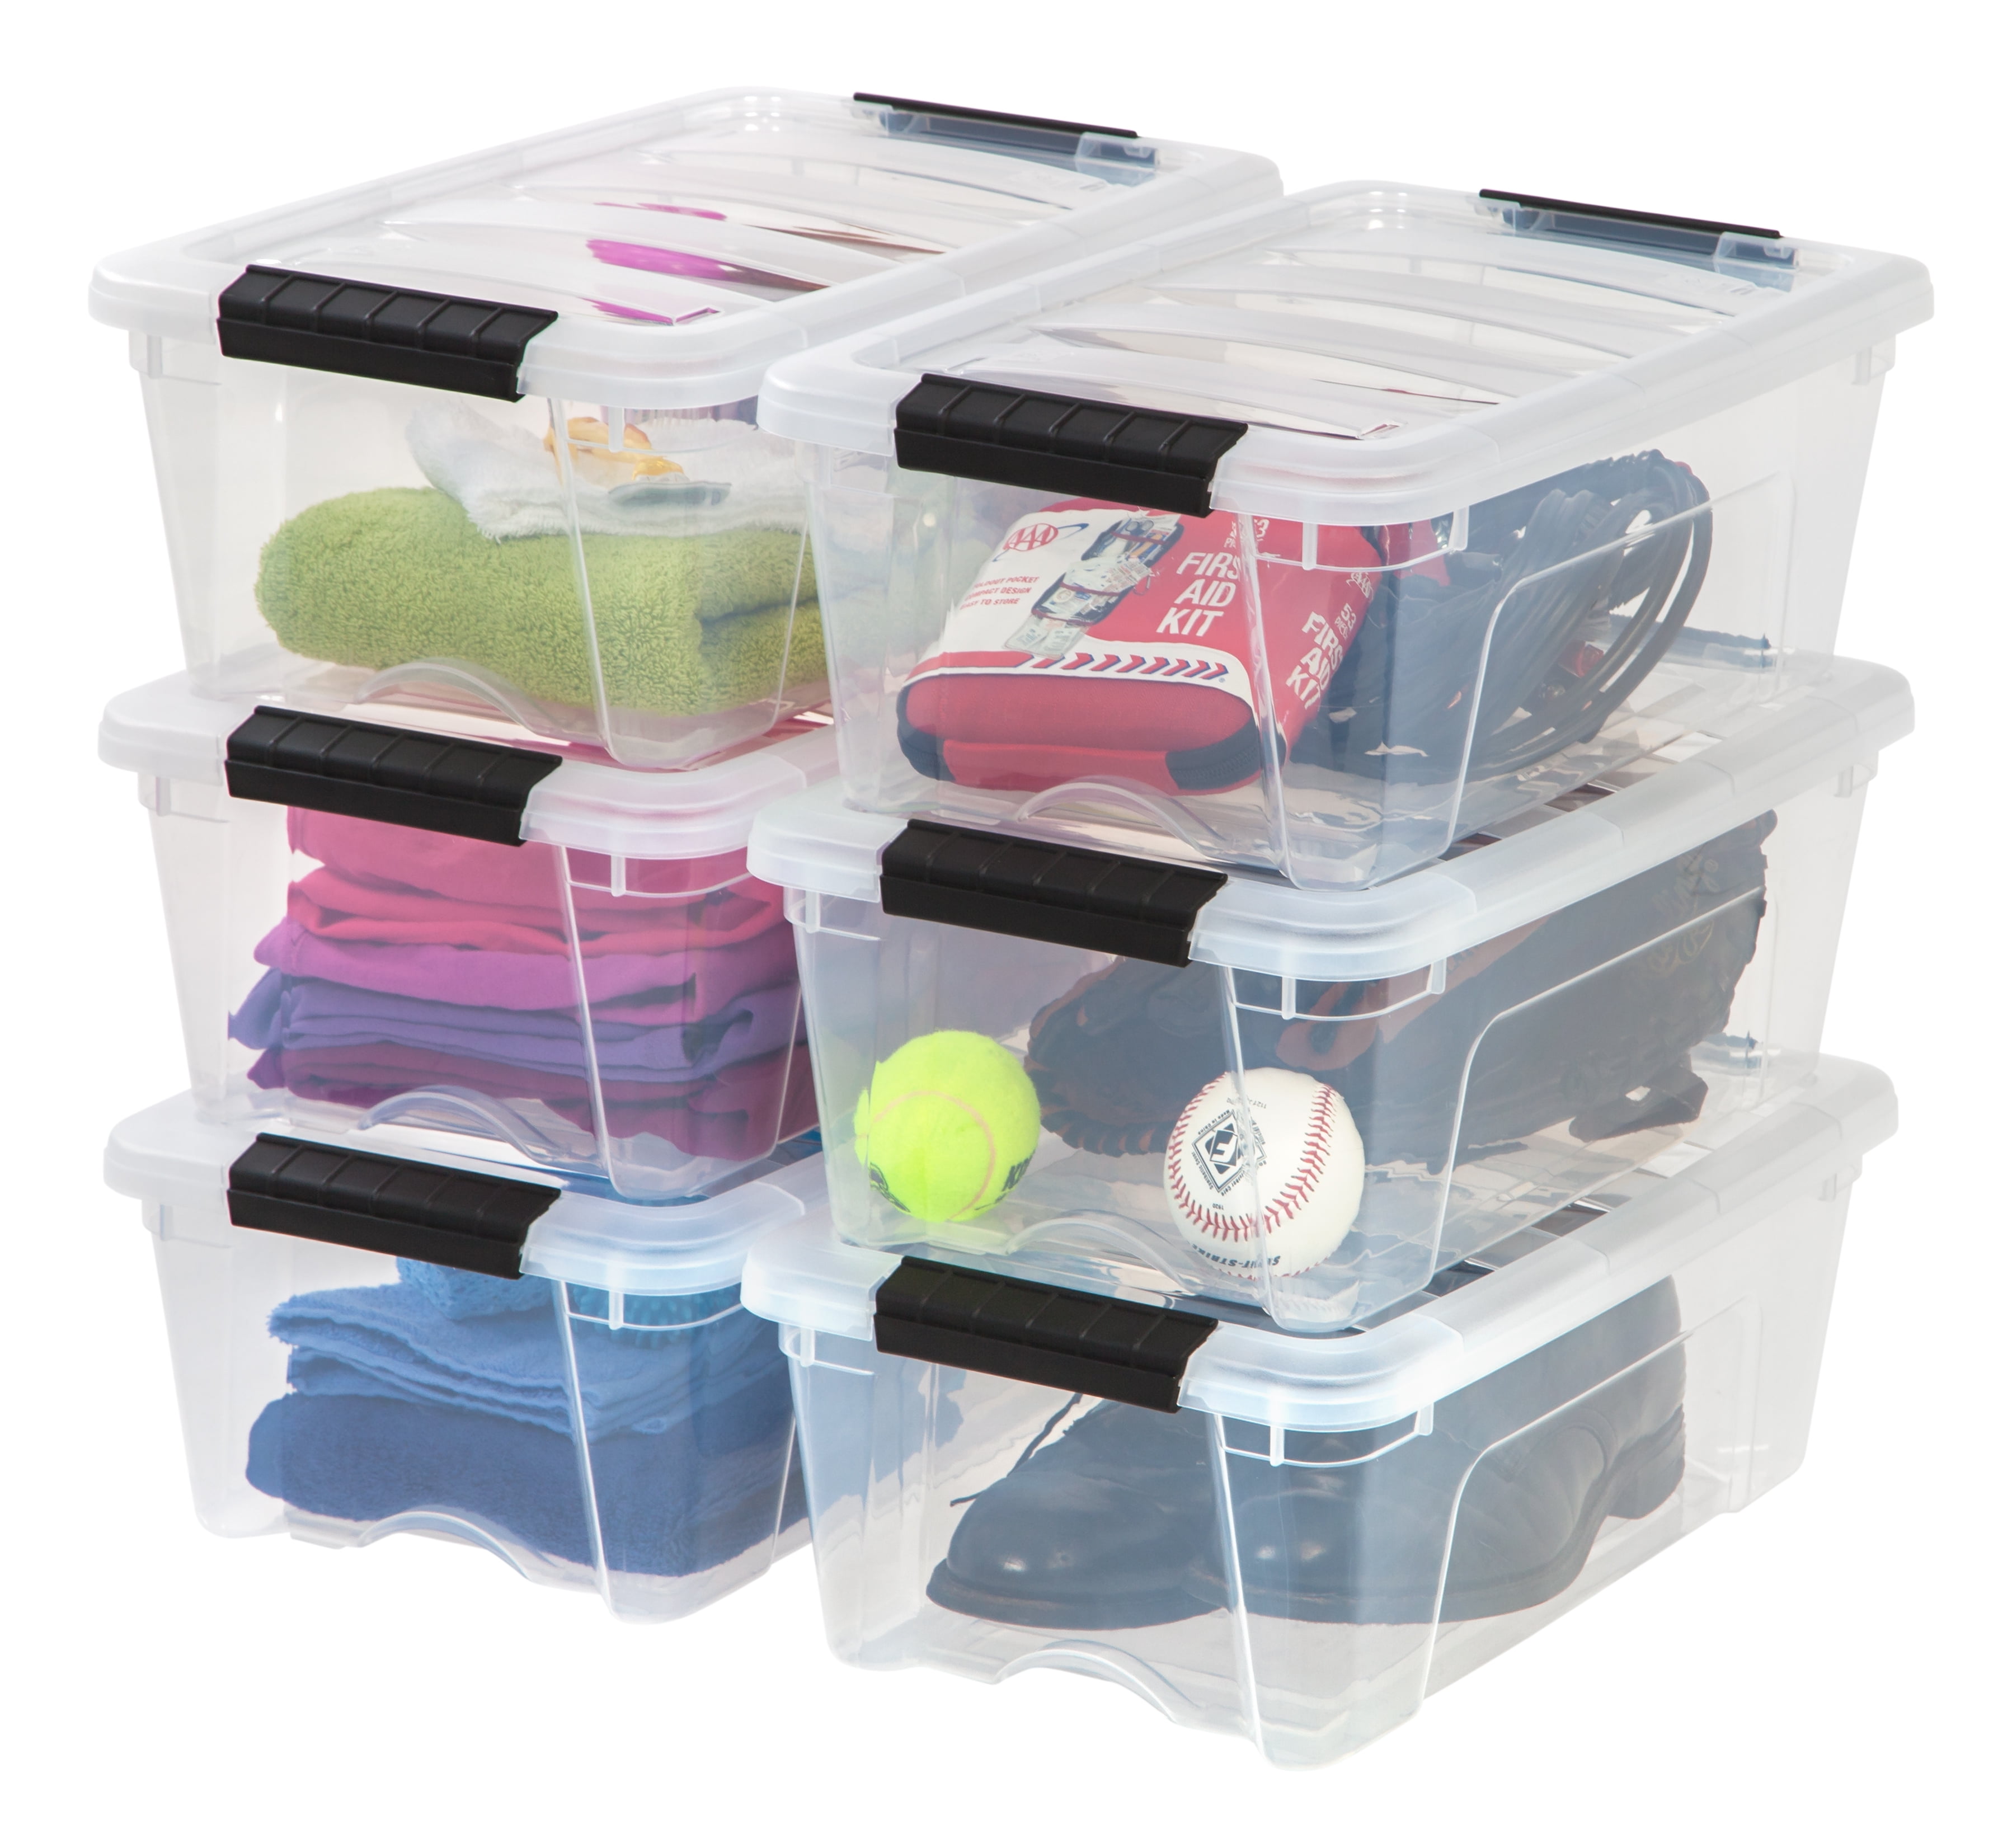 Large Capacity Plastic Stack Storage Bin with Dividers - China